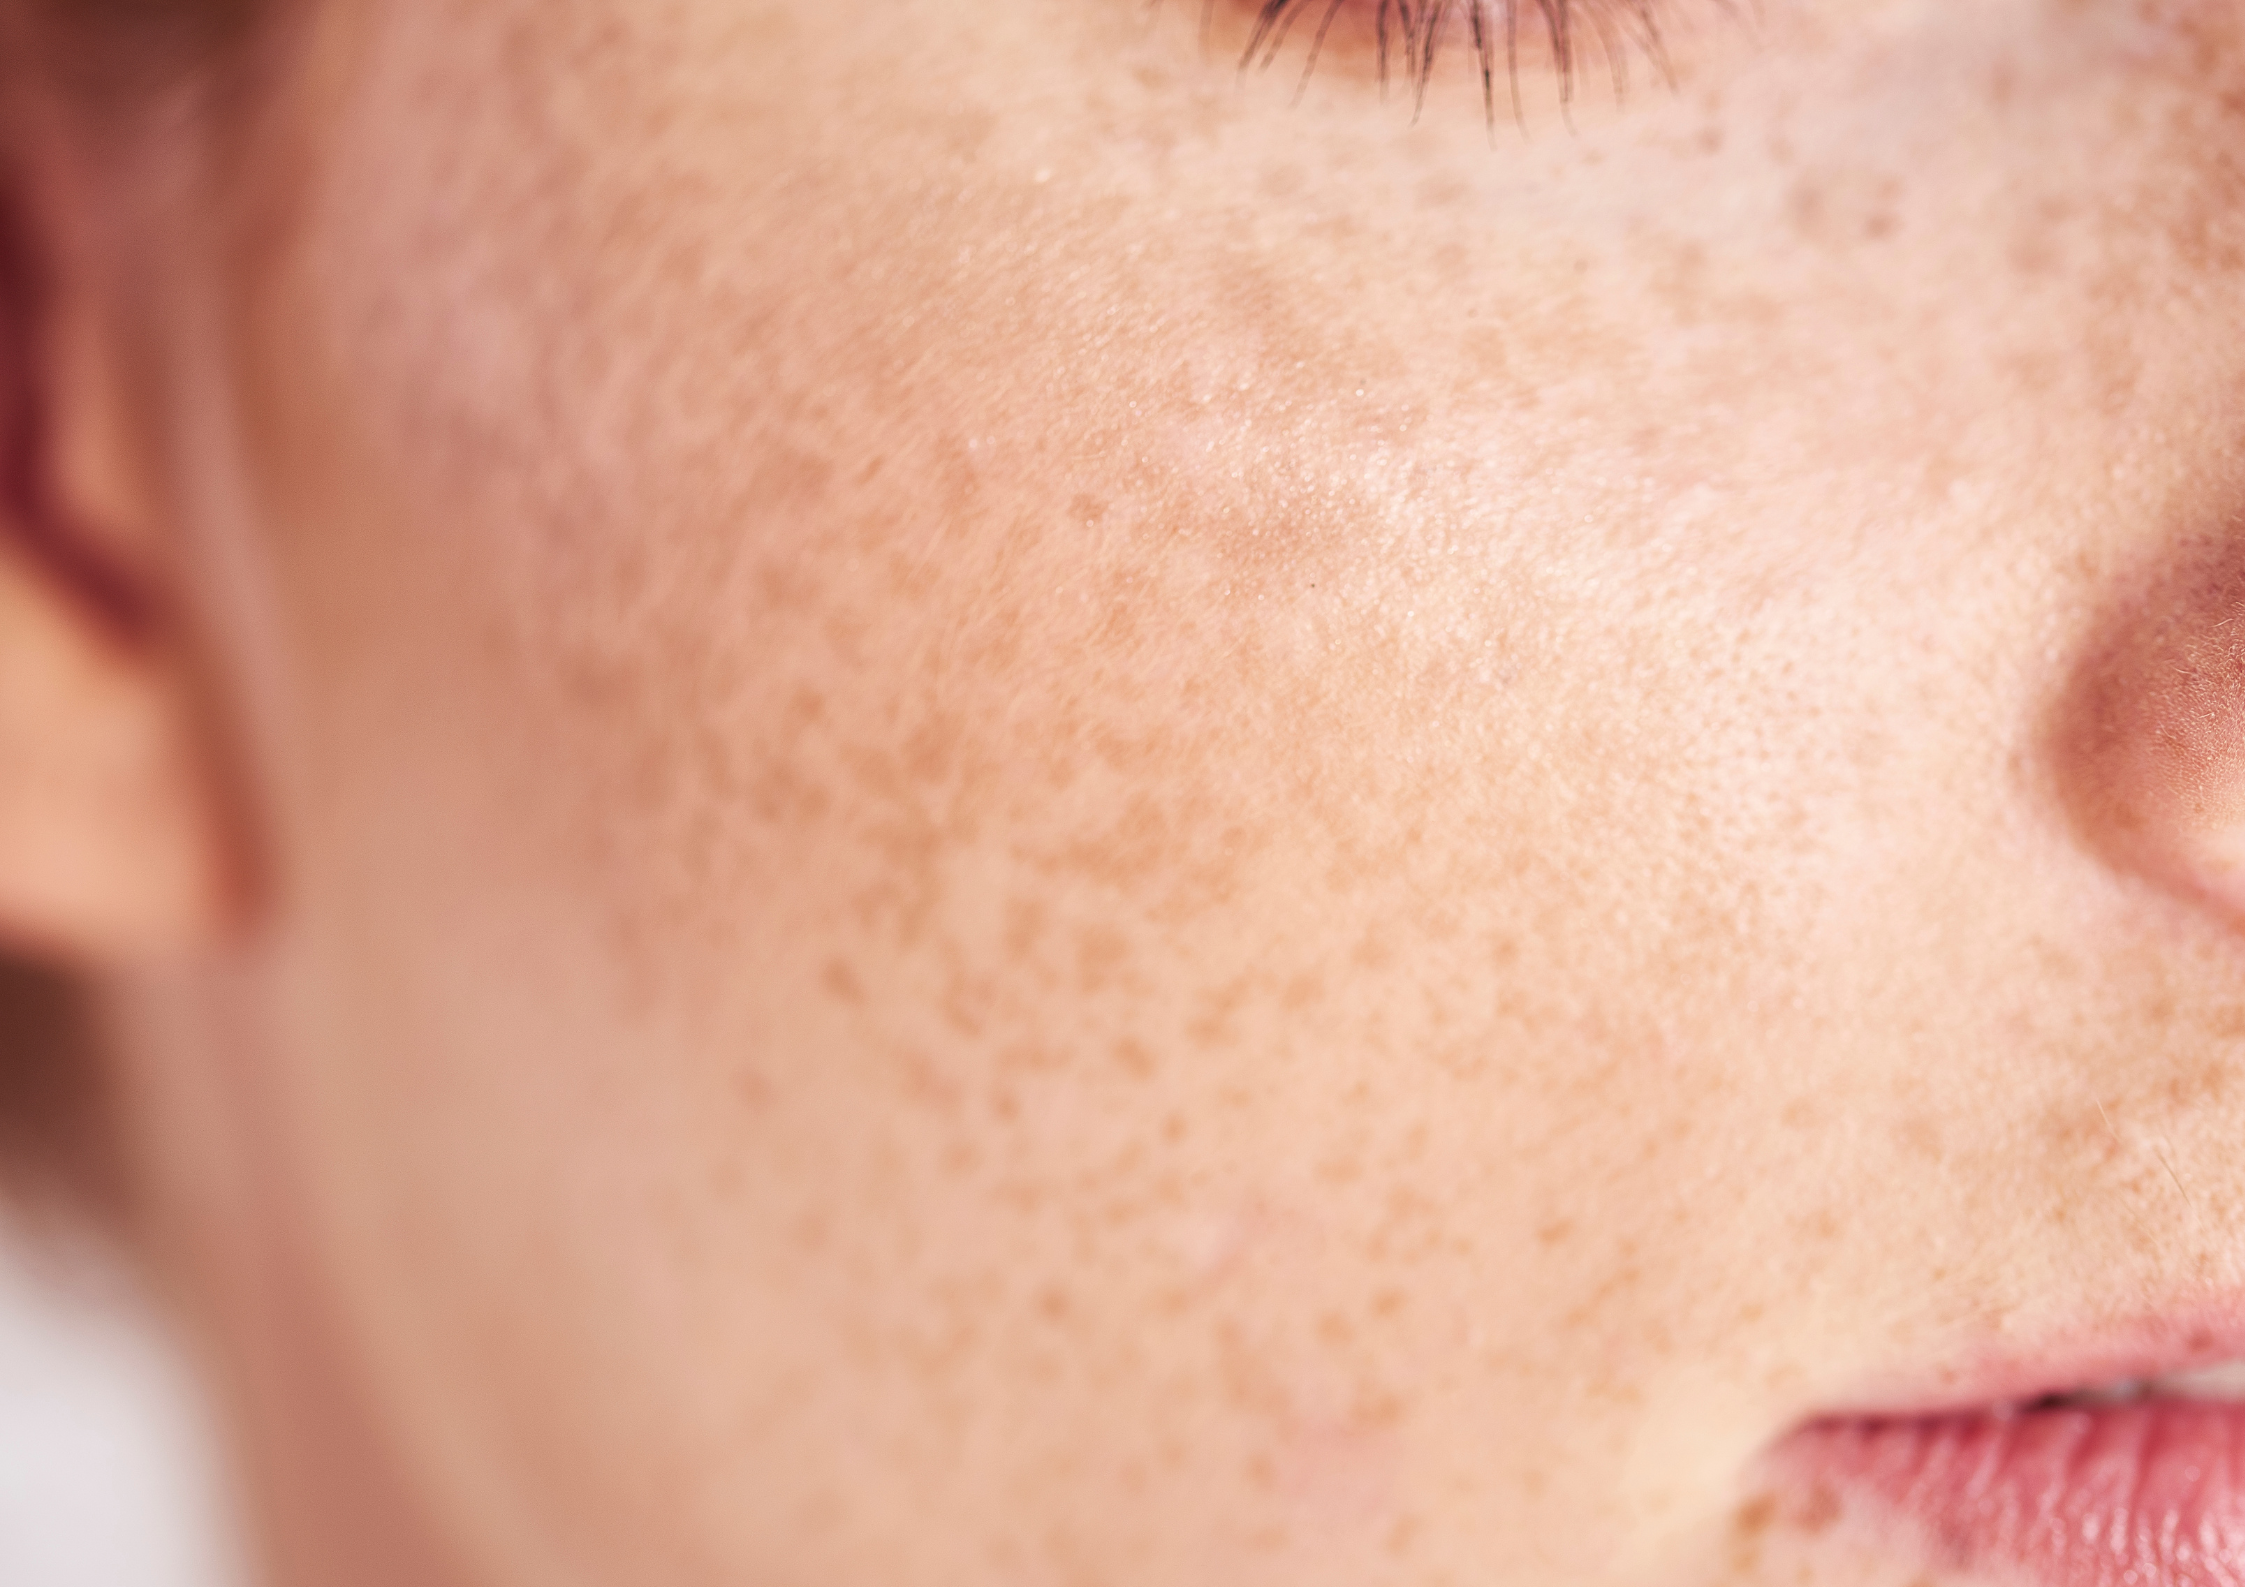 Up close picture of a women's cheek with freckles.